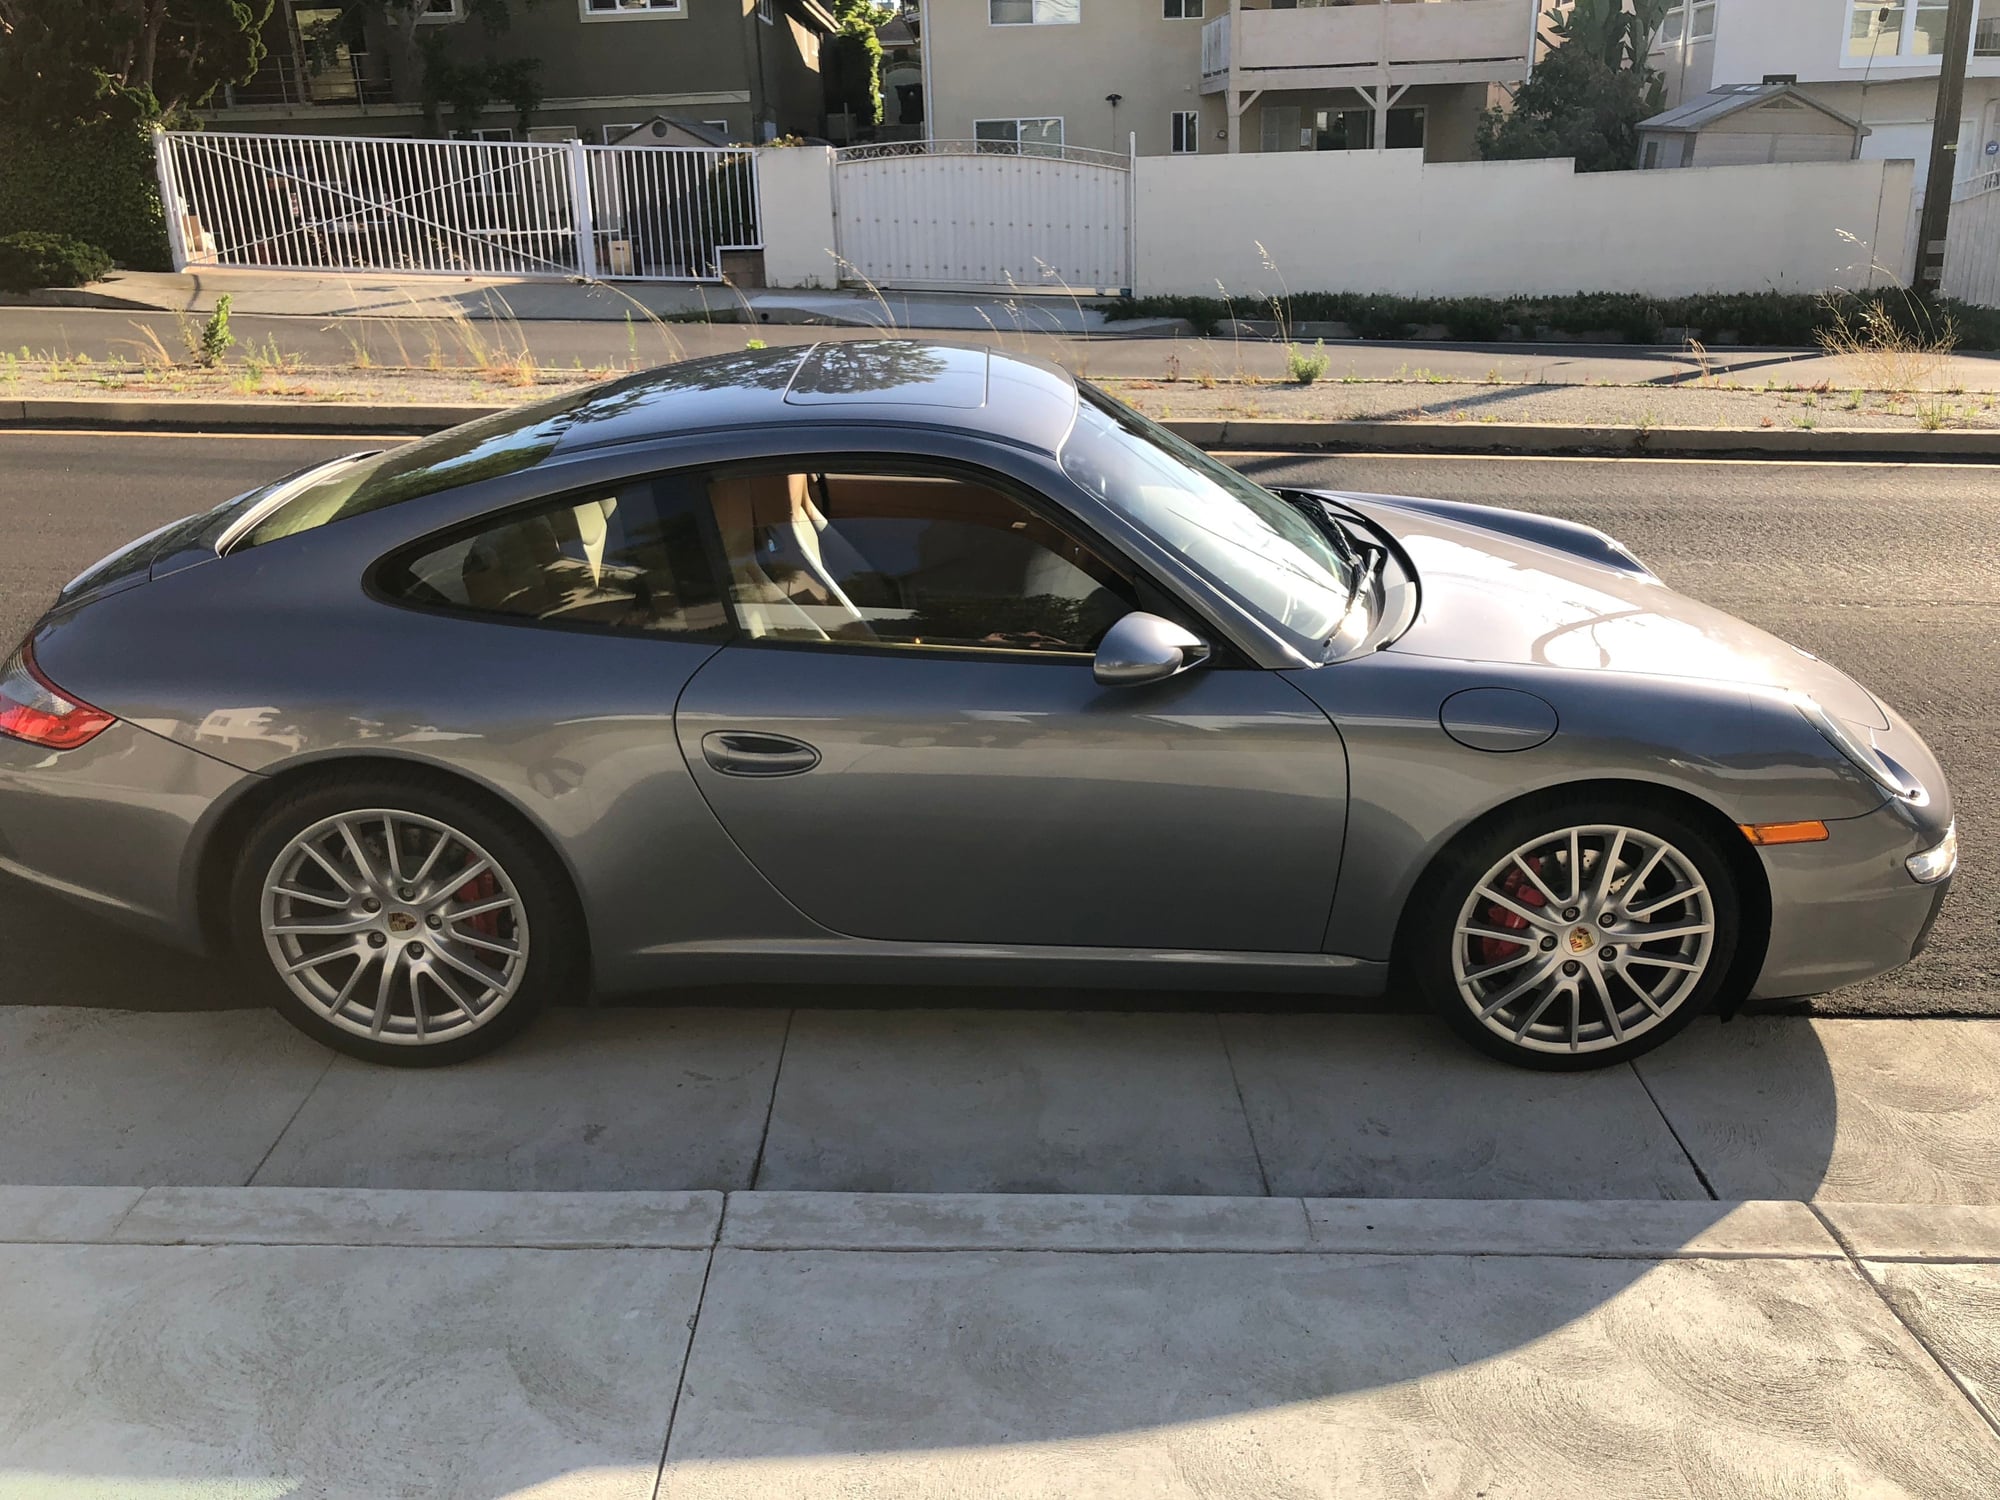 2005 Porsche 911 - 2005 Porsche 911 Carrera S, seal gray, sand beige, 41k miles, manual, new tires - Used - VIN WP0AB29965S742412 - 41,300 Miles - 6 cyl - 2WD - Manual - Coupe - Gray - Los Angeles, CA 90293, United States